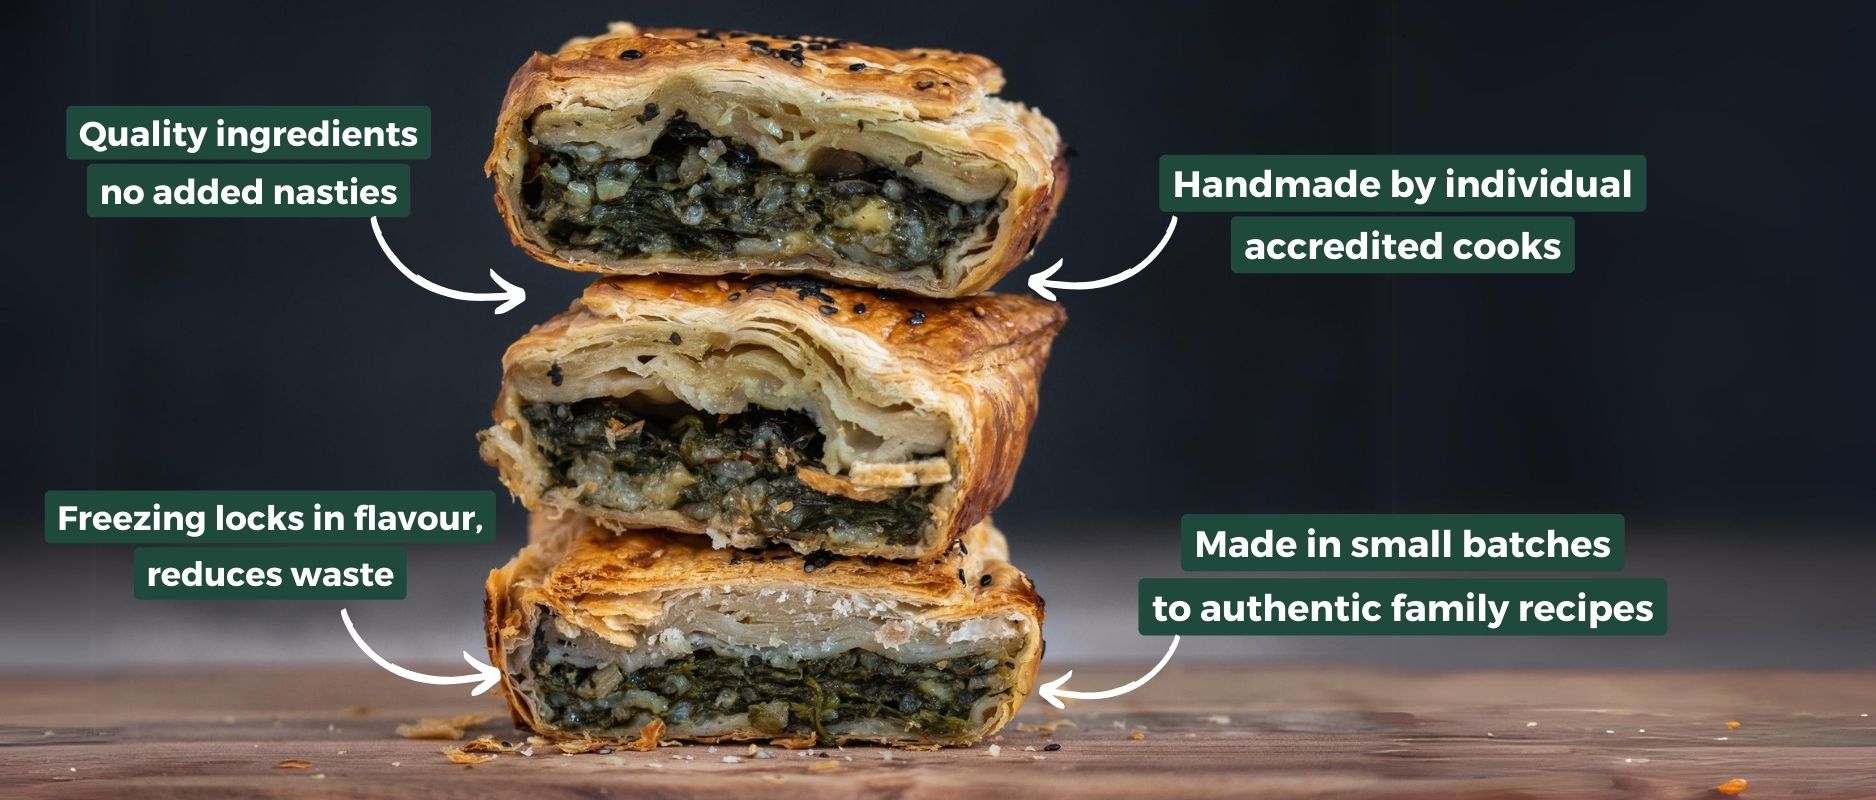 Image of Maurice's Spanakopita with features of FoodSt meals